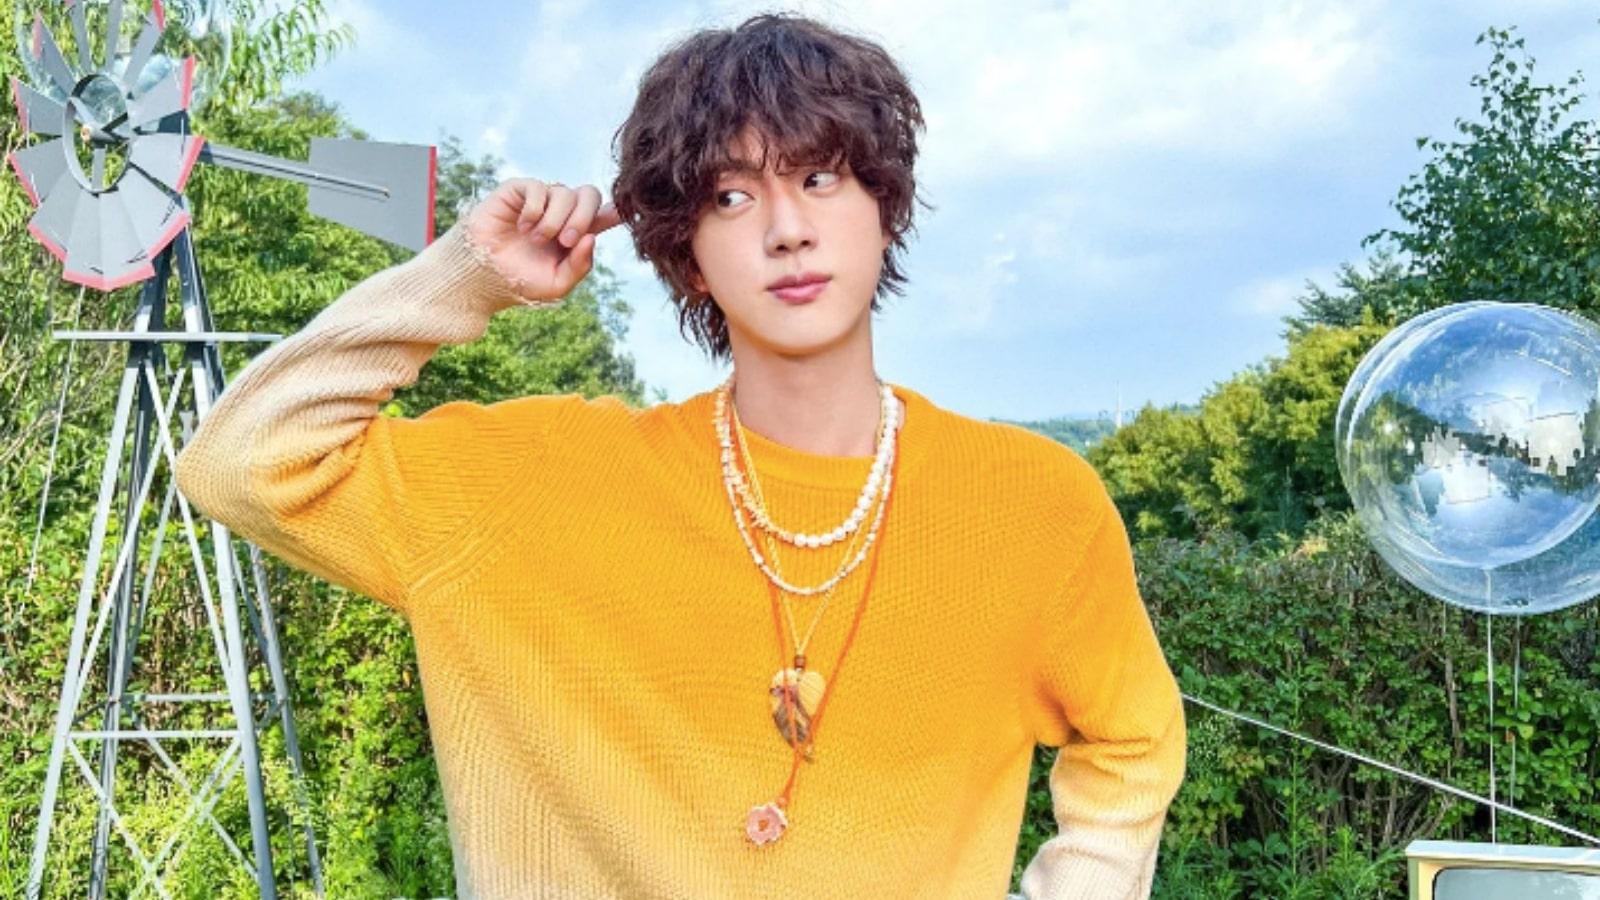 BTS' Jin poses in yellow on Instagram